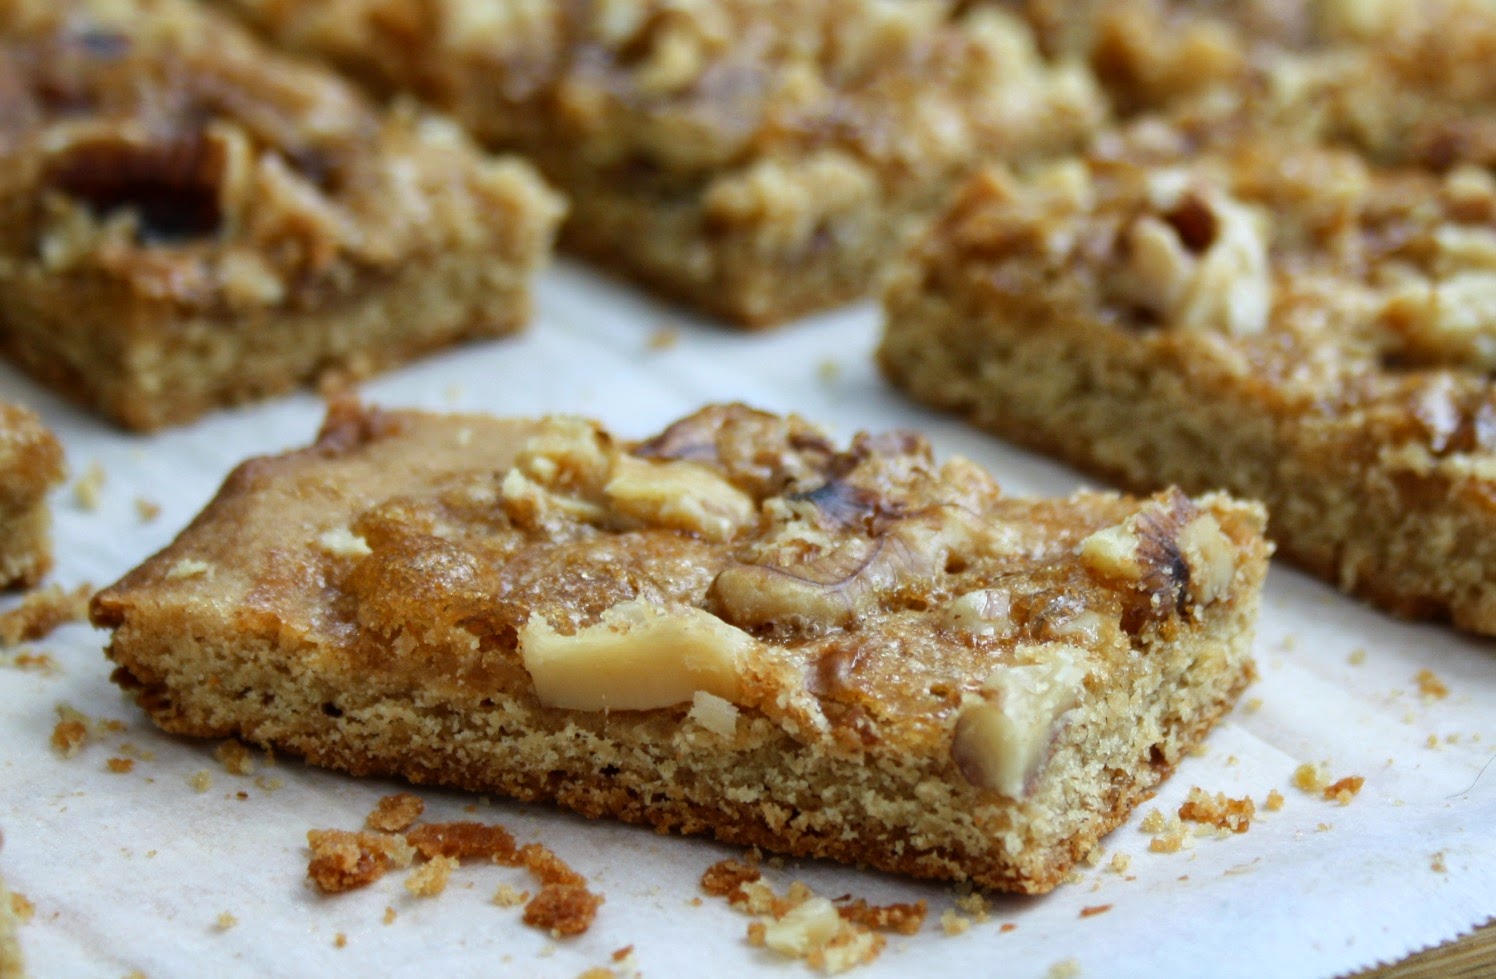 Pecan bars with a shortbread base and crunchy nut topping